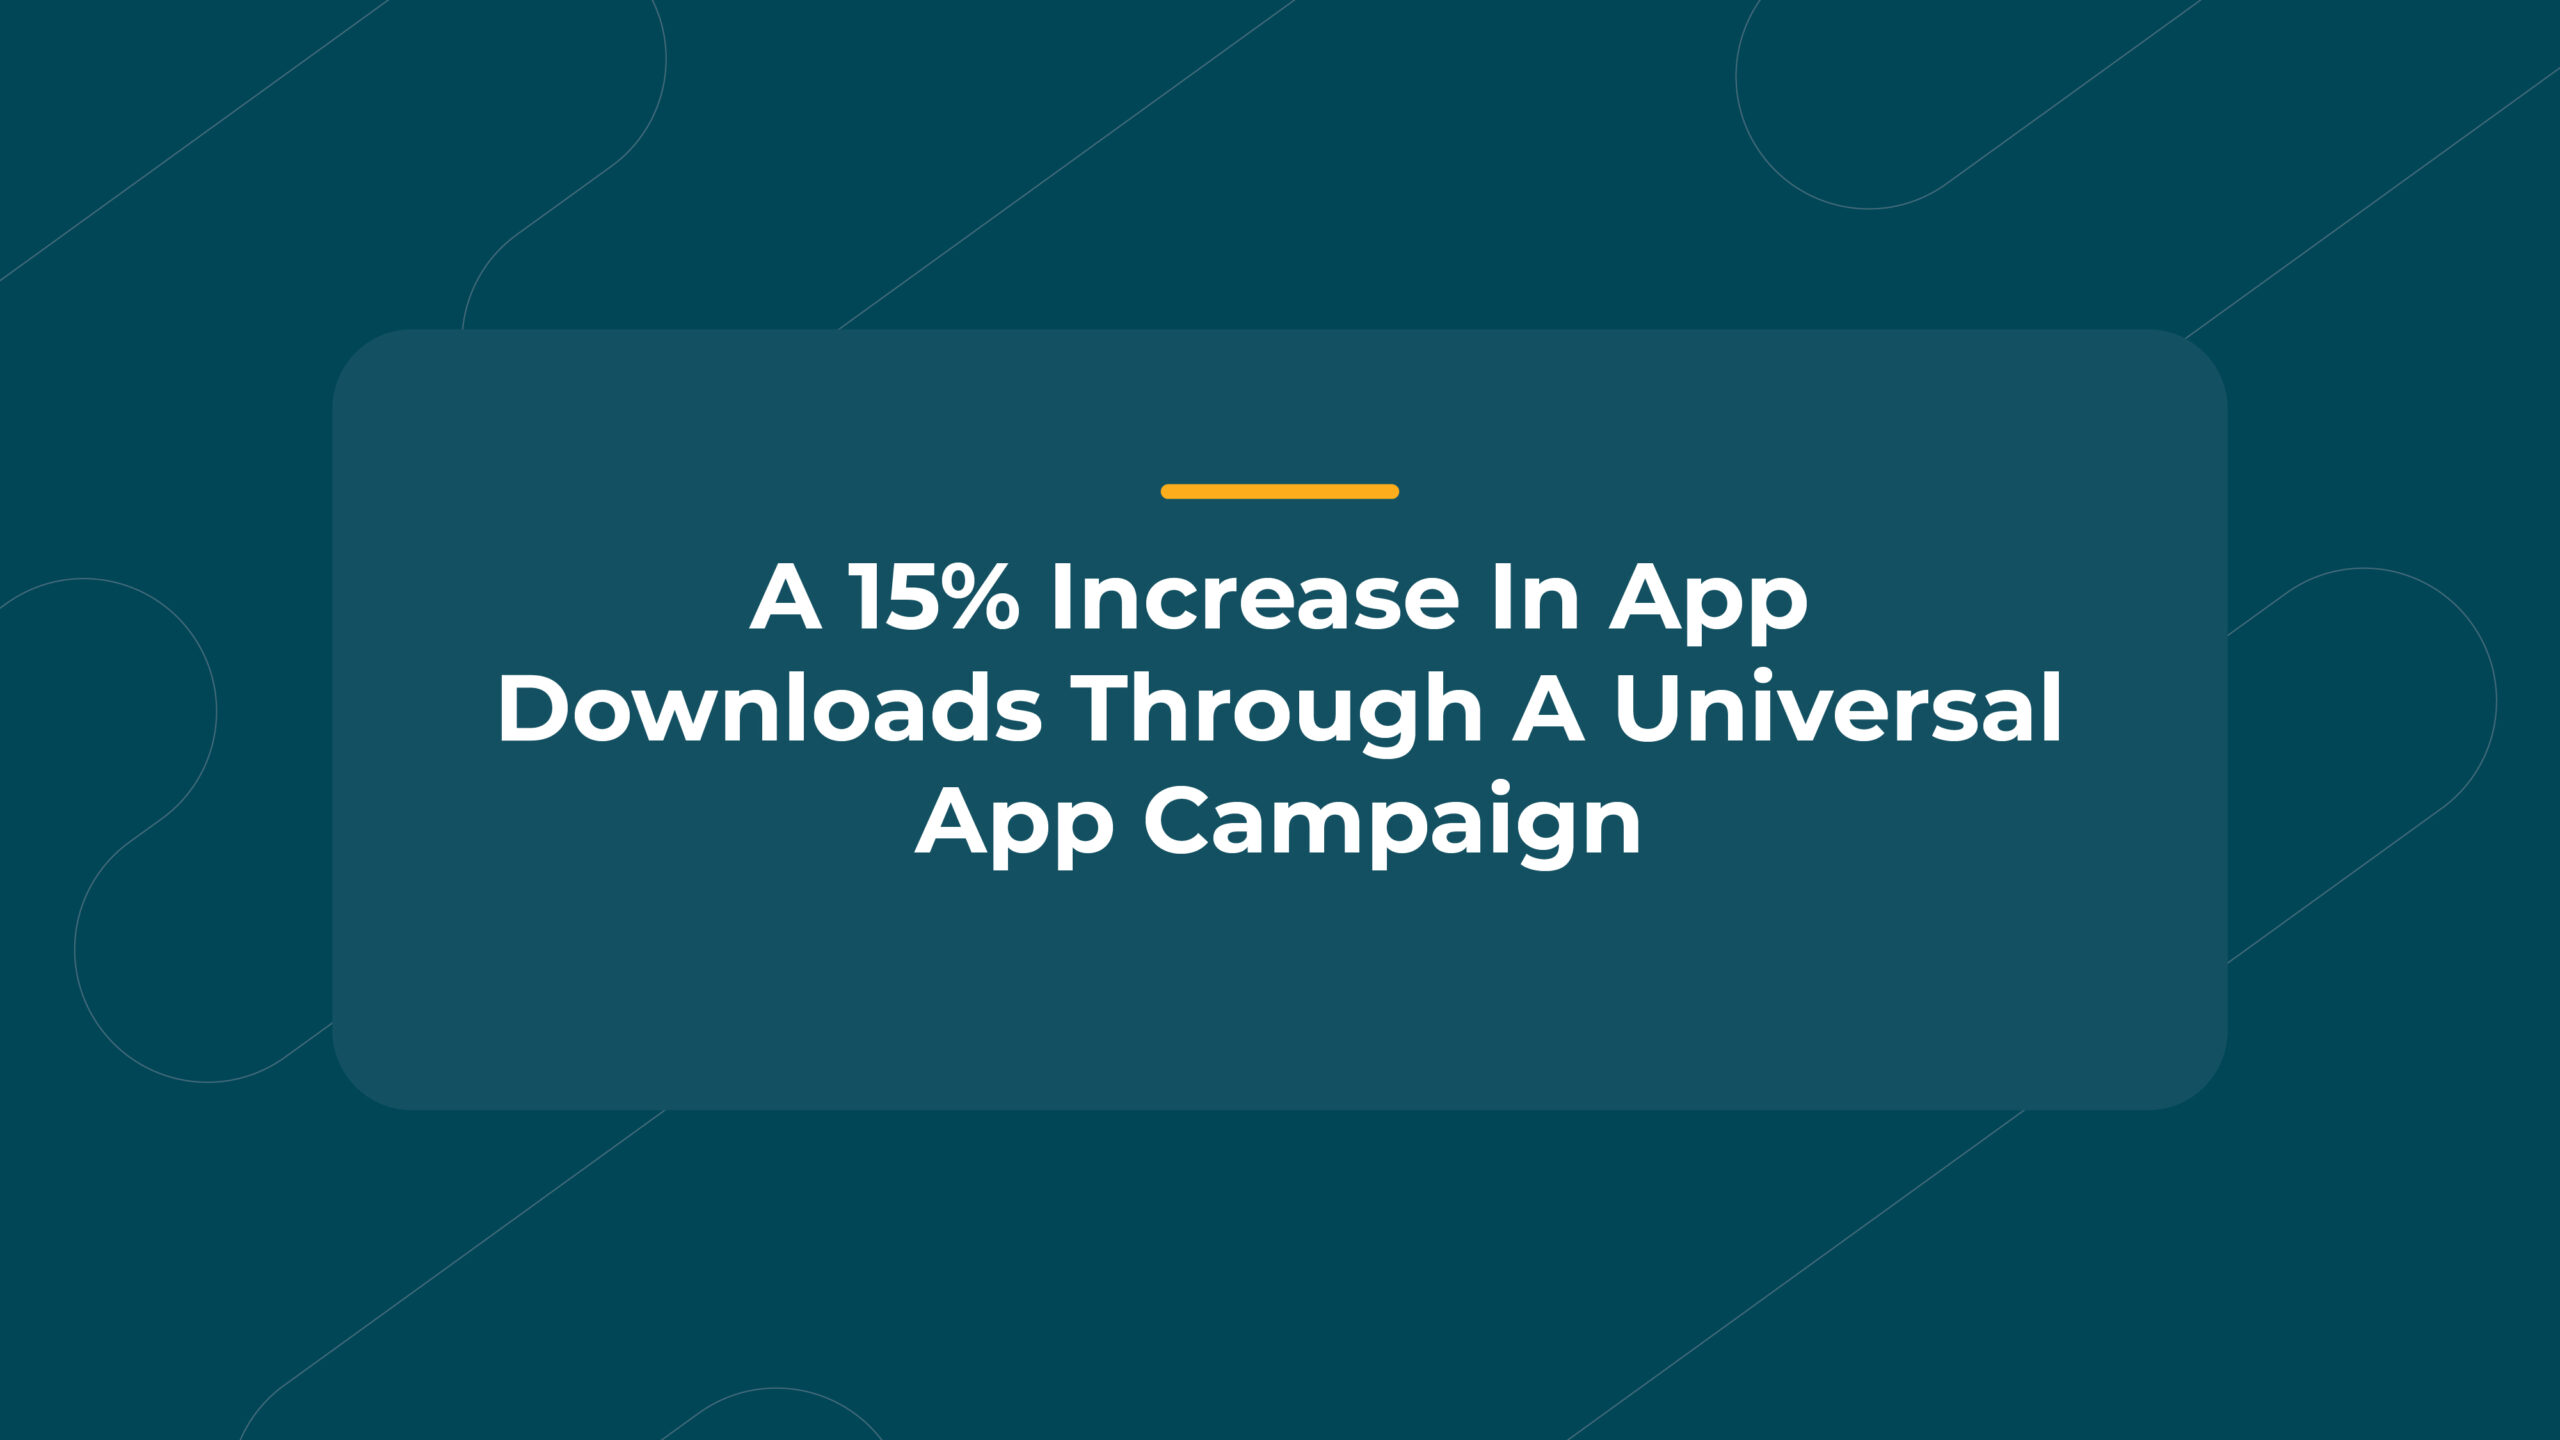 A 15% Increase In App Downloads Through A Universal App Campaign